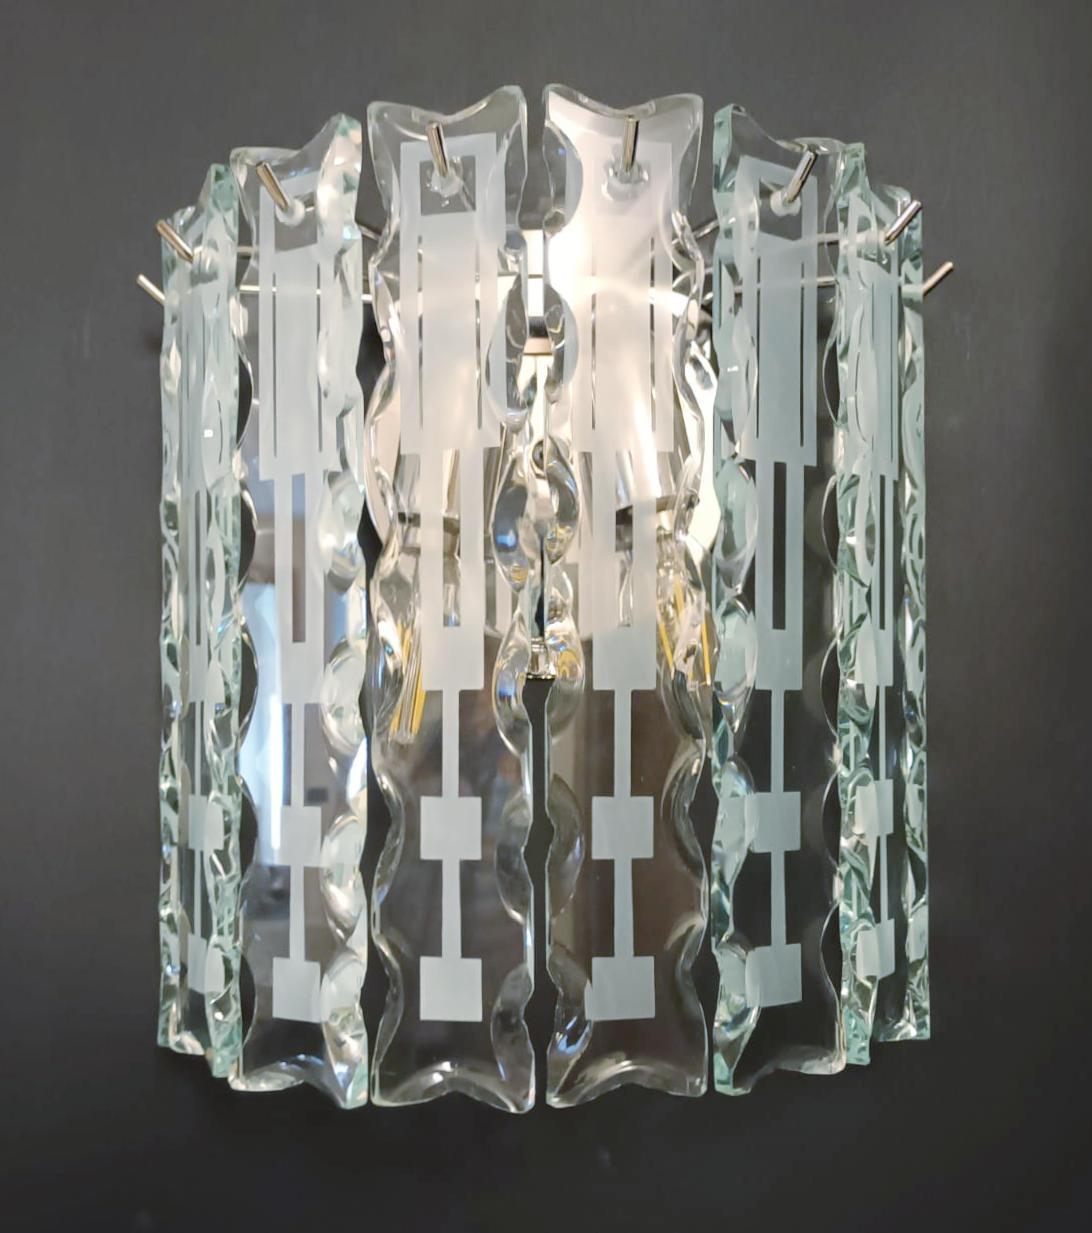 Vintage Italian wall sconces with deco beveled glass bars mounted on chrome frames / Made in Italy by Cristal Arte, circa 1960s
2 lights / E12 or E14 type / max 40W each
Measures: height 10 inches, width 10 inches, depth 5 inches
3 pairs in stock in